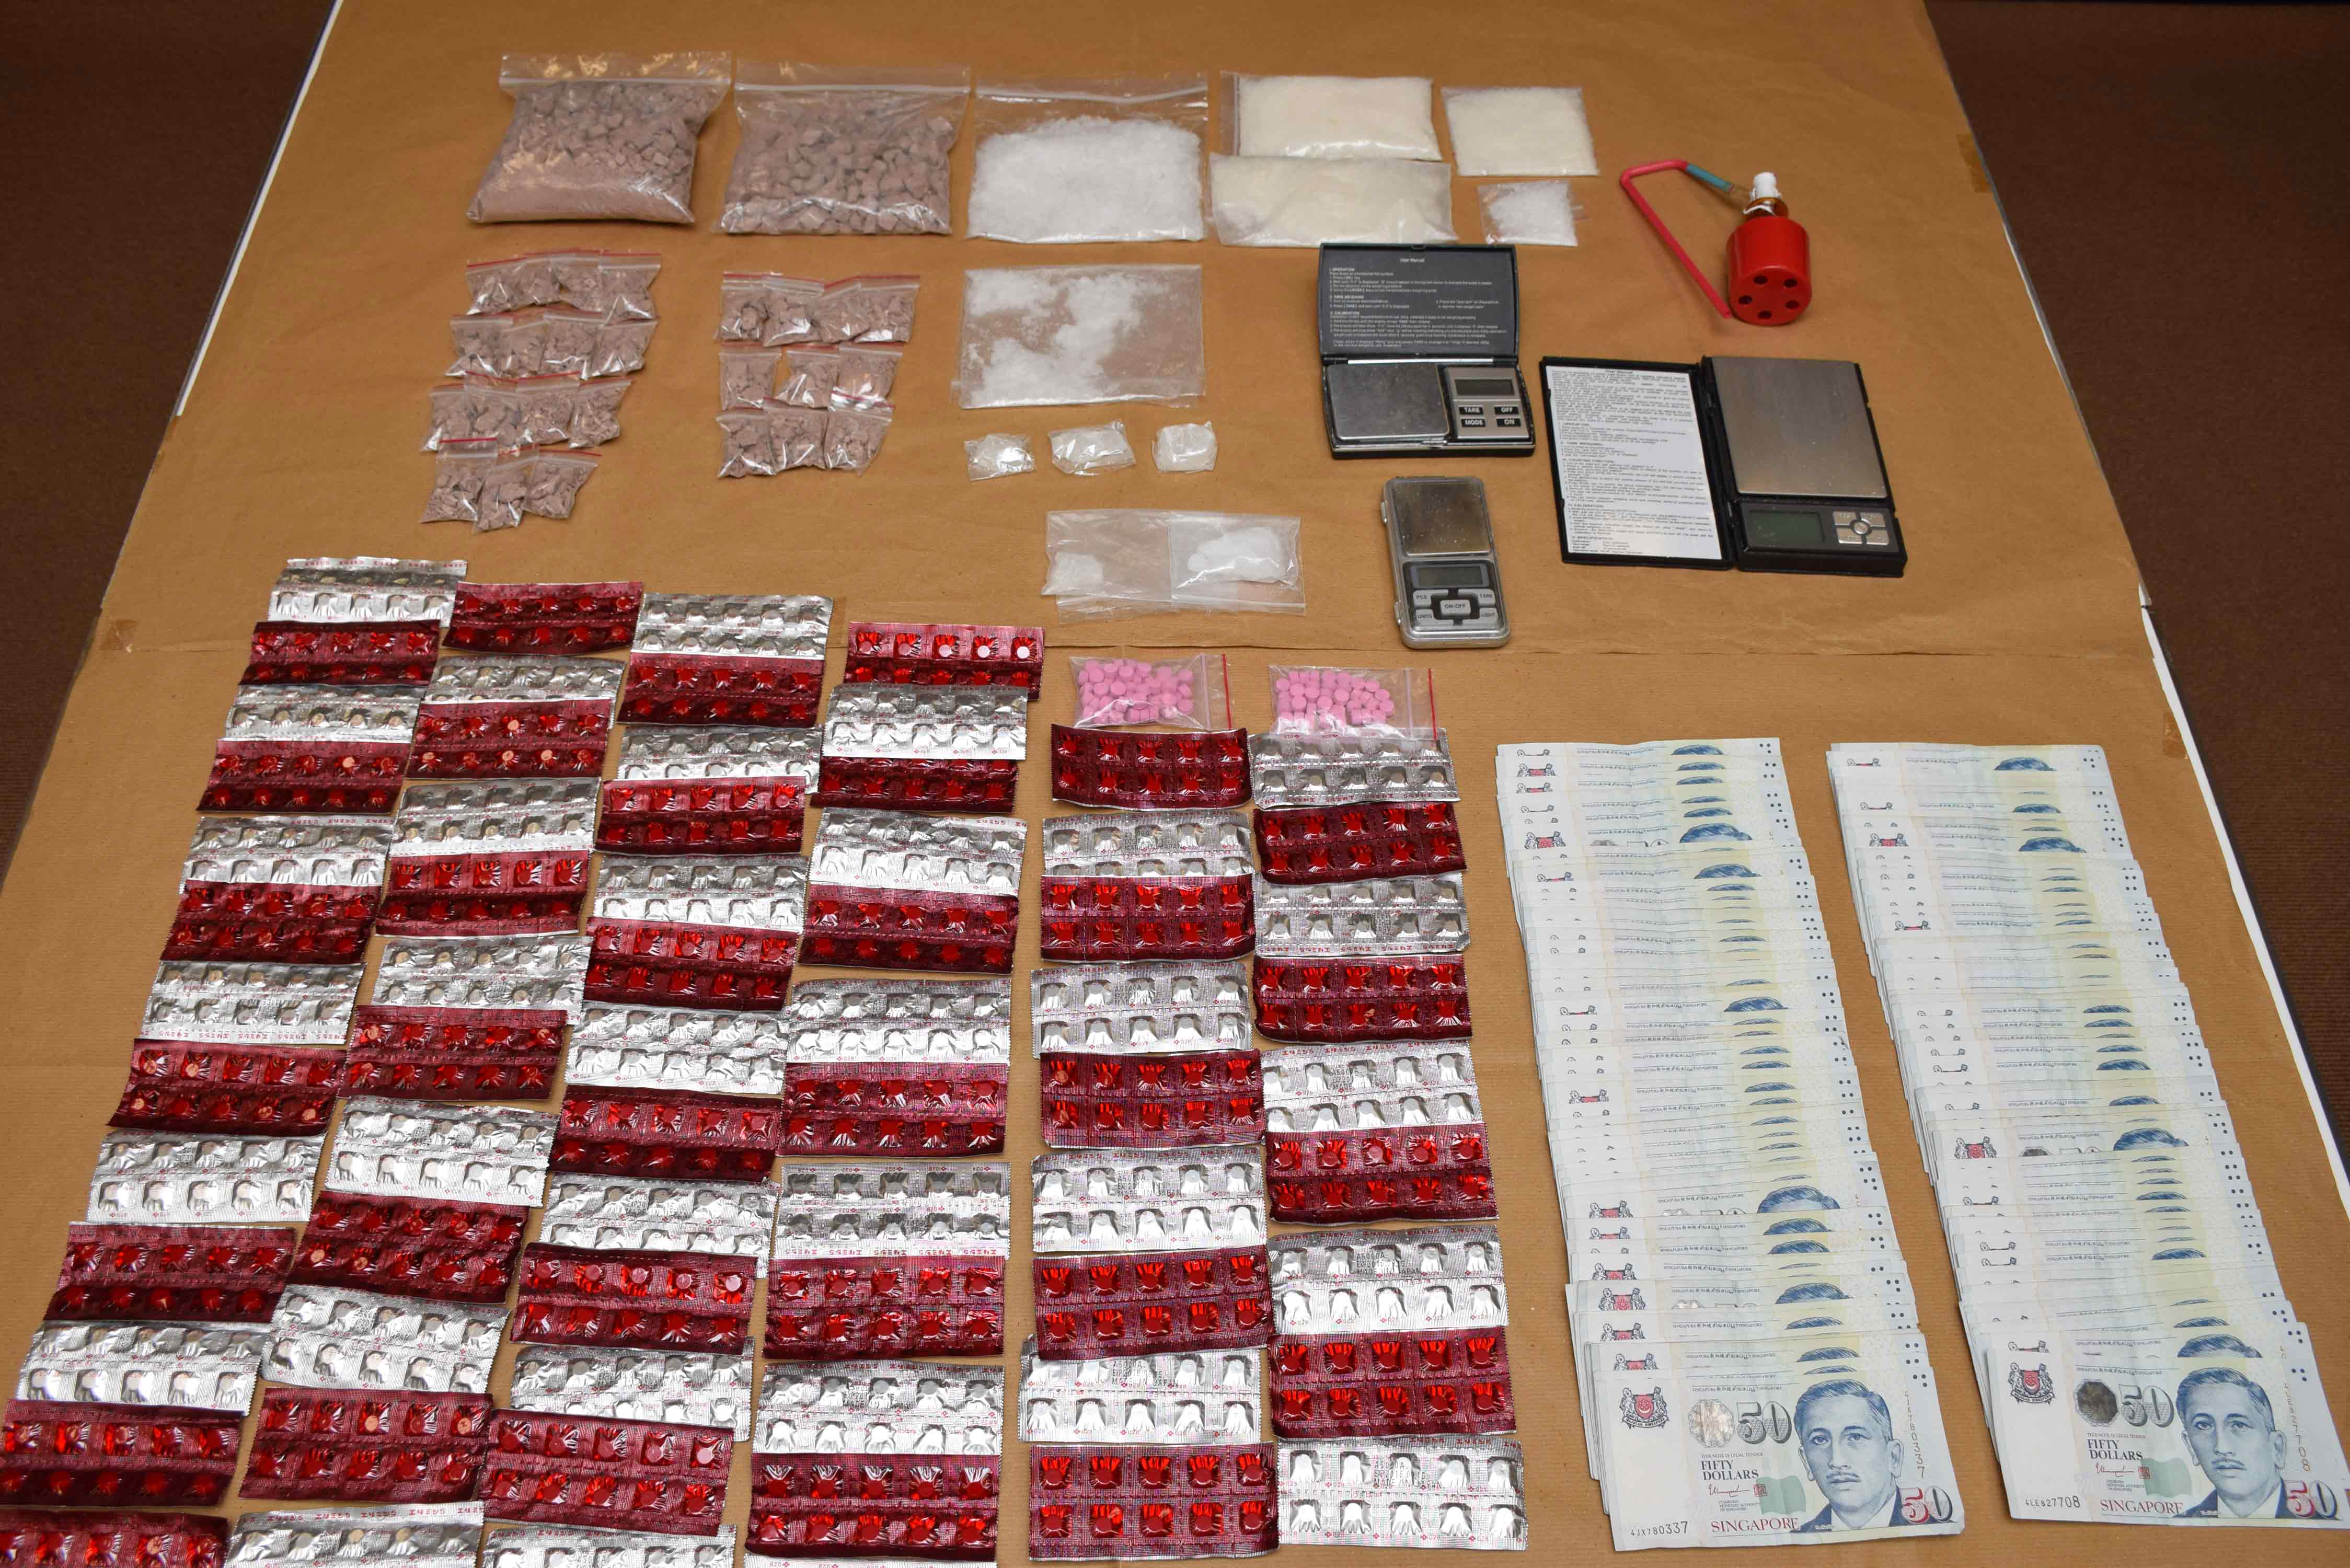 Photo 1: Drugs, drug paraphernalia and cash seized from CNB operation on 8 December 2015.